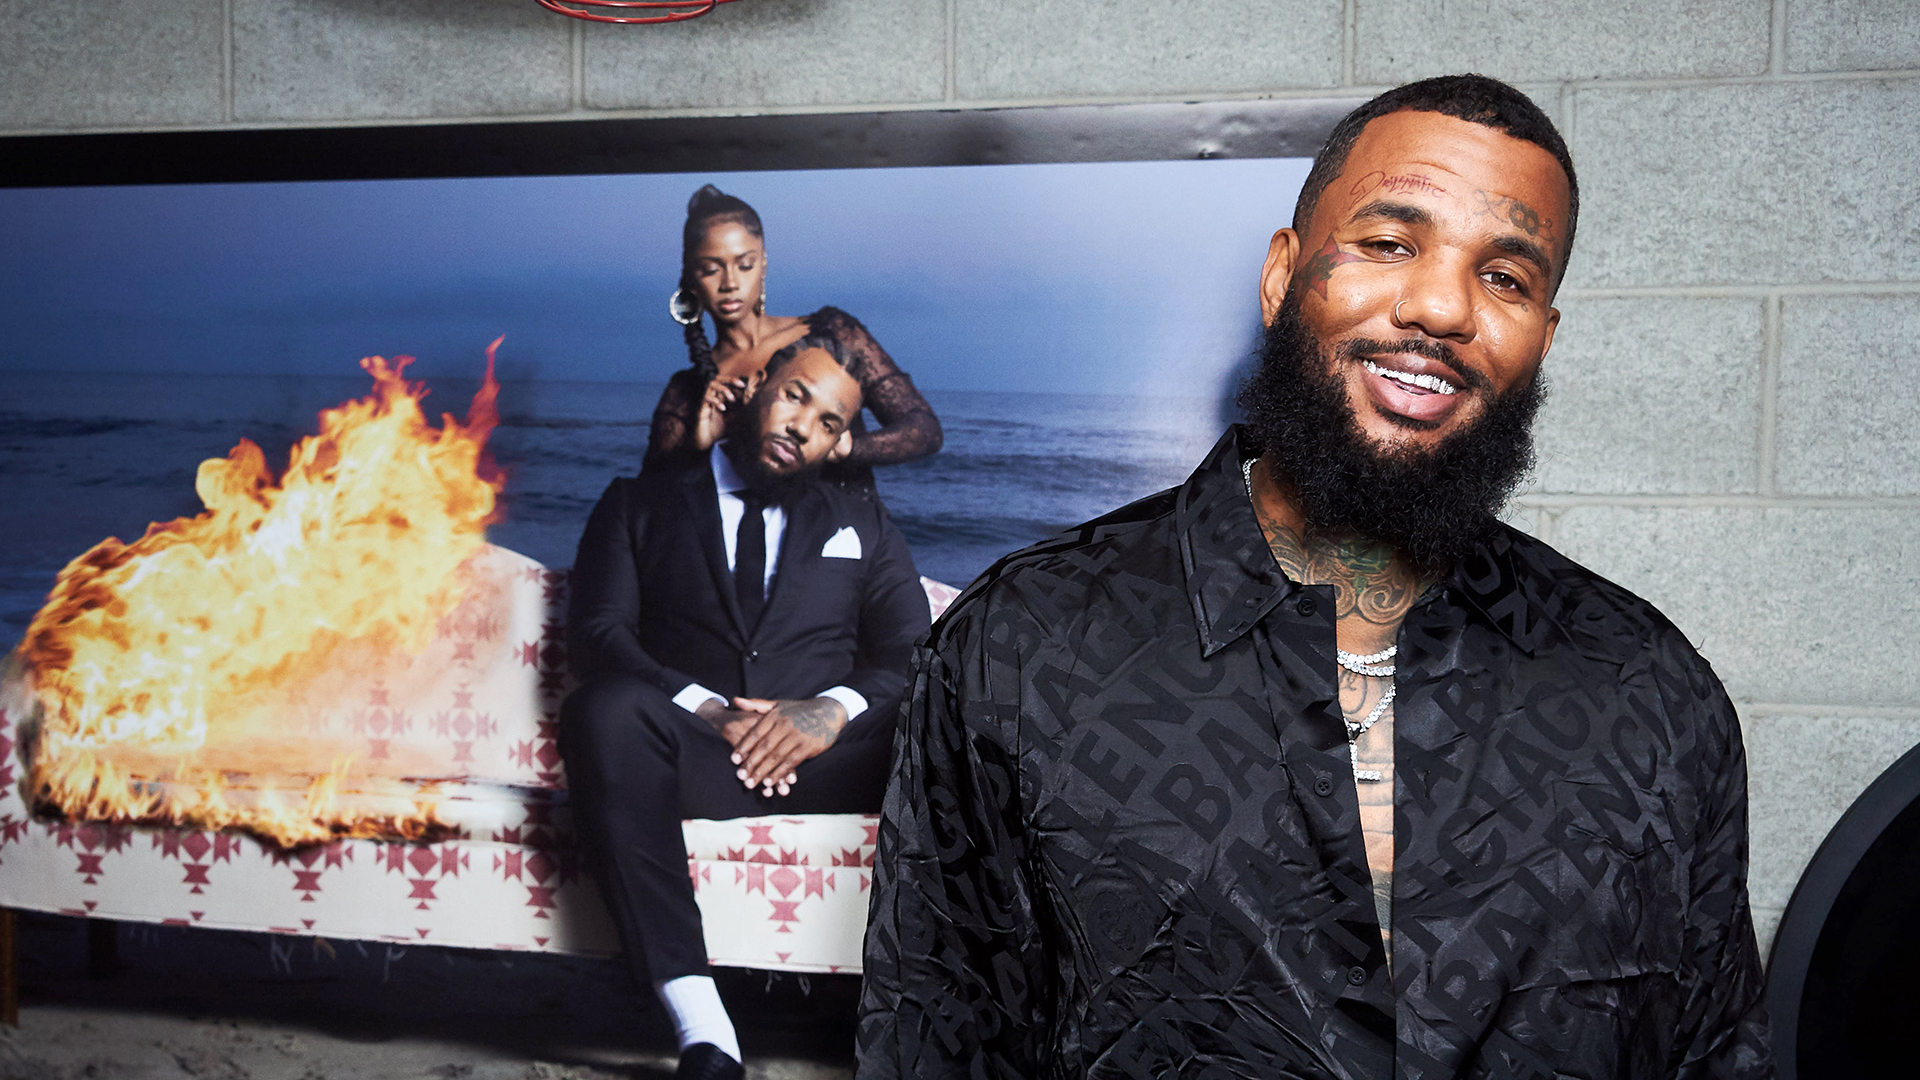 The Game Explains Why He Came for Eminem With “The Black Slim Shady”